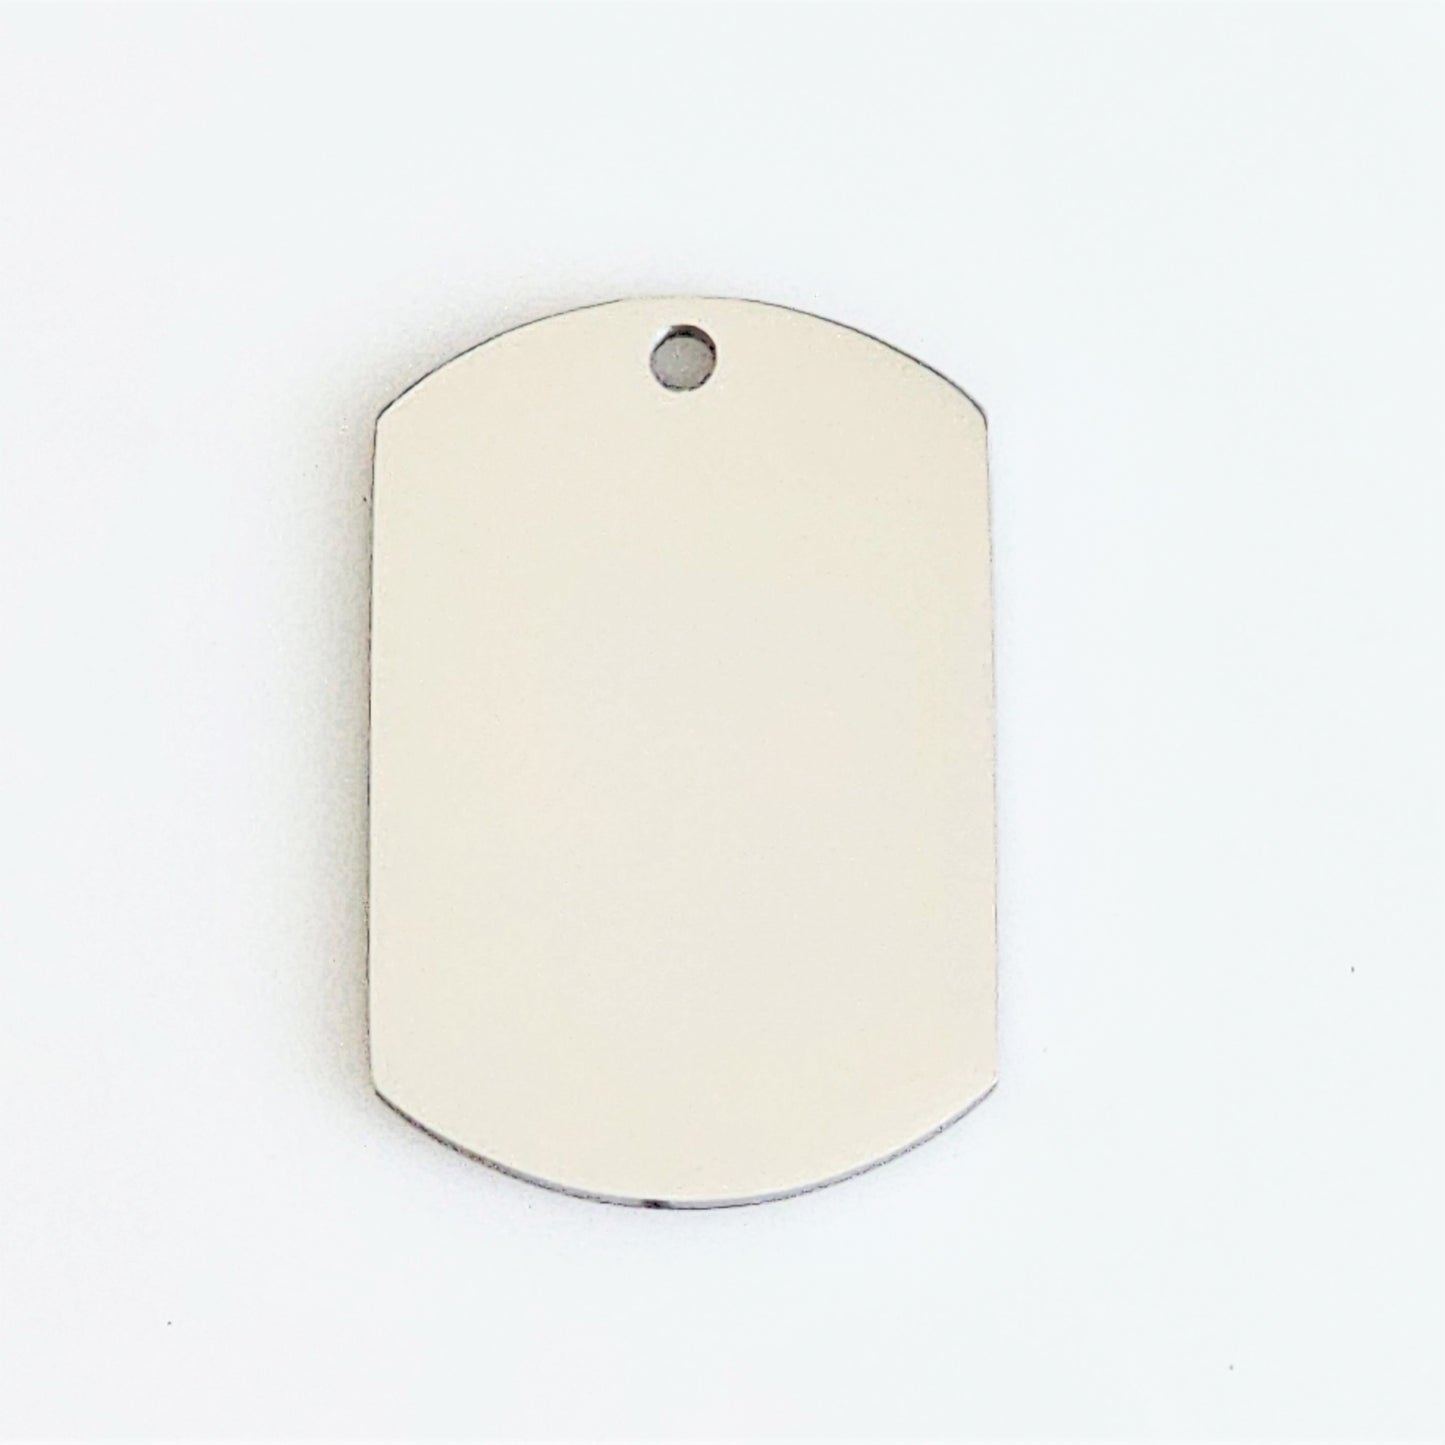 Stainless Steel - 3/4" x 1" Dog Tag